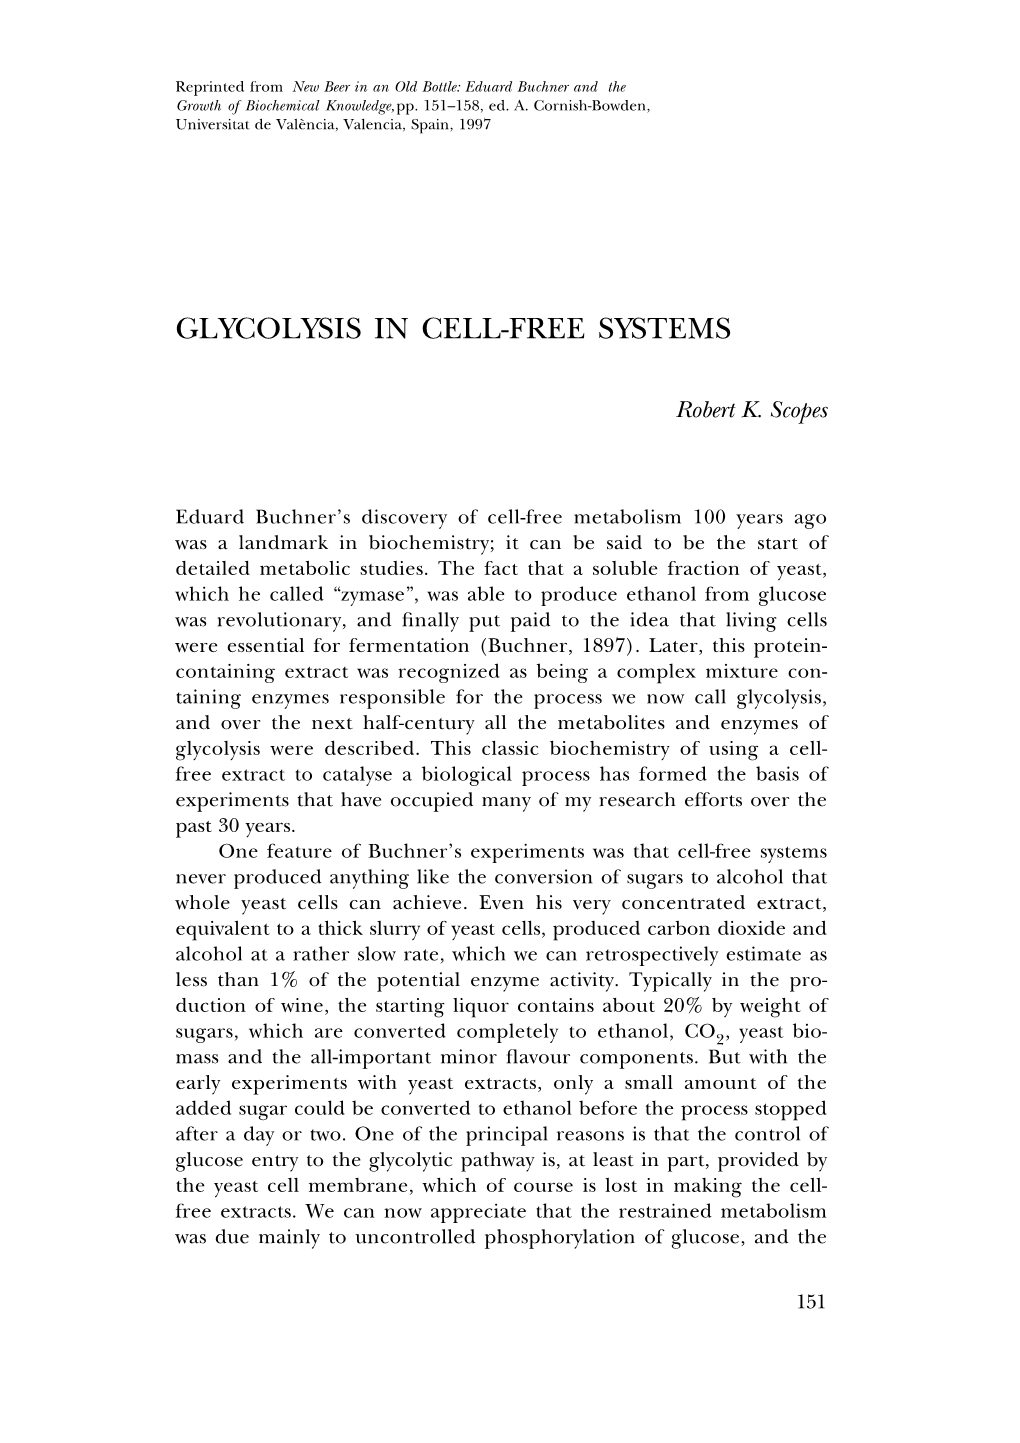 Glycolysis in Cell-Free Systems